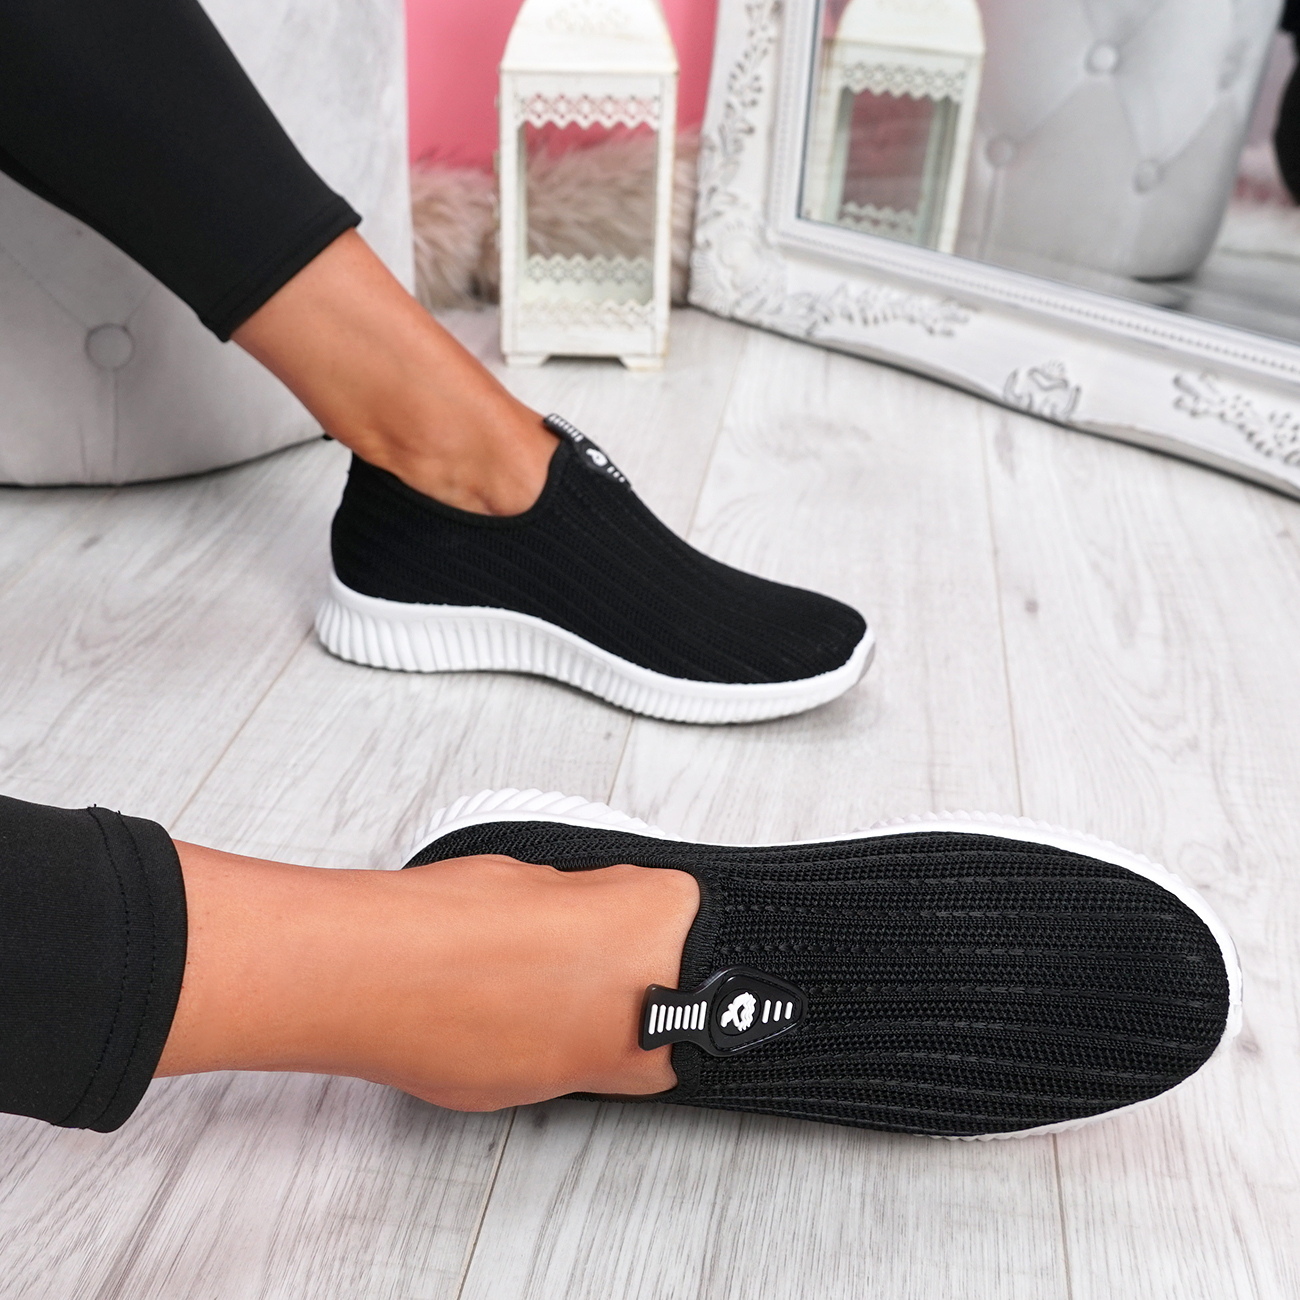 WOMENS LADIES SLIP ON KNIT TRAINERS PARTY CASUAL SPORT SNEAKERS WOMEN ...